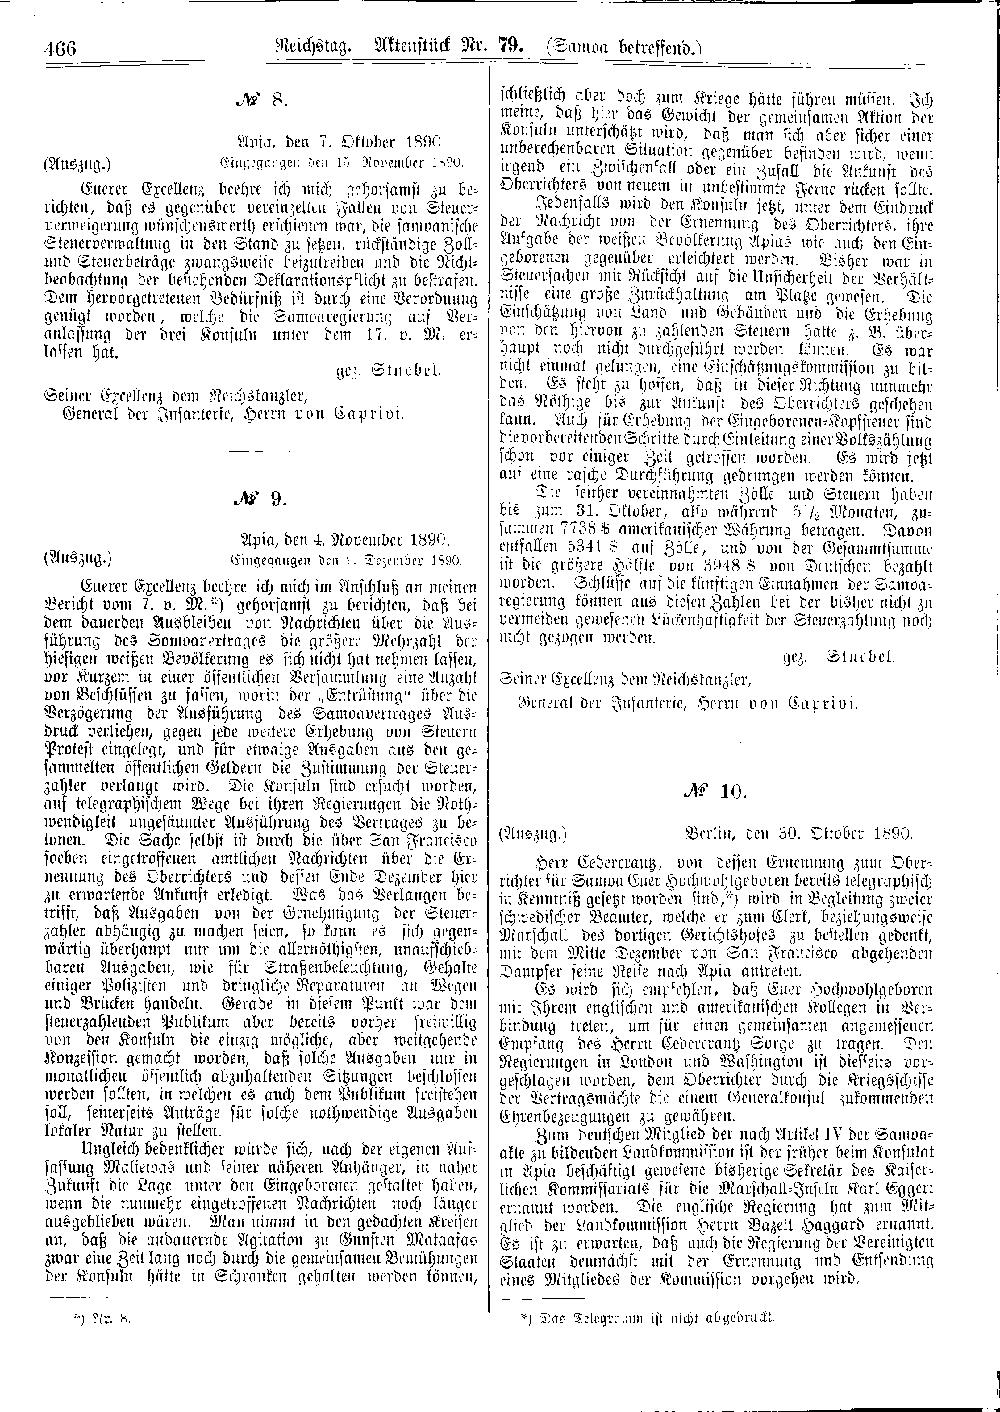 Scan of page 466